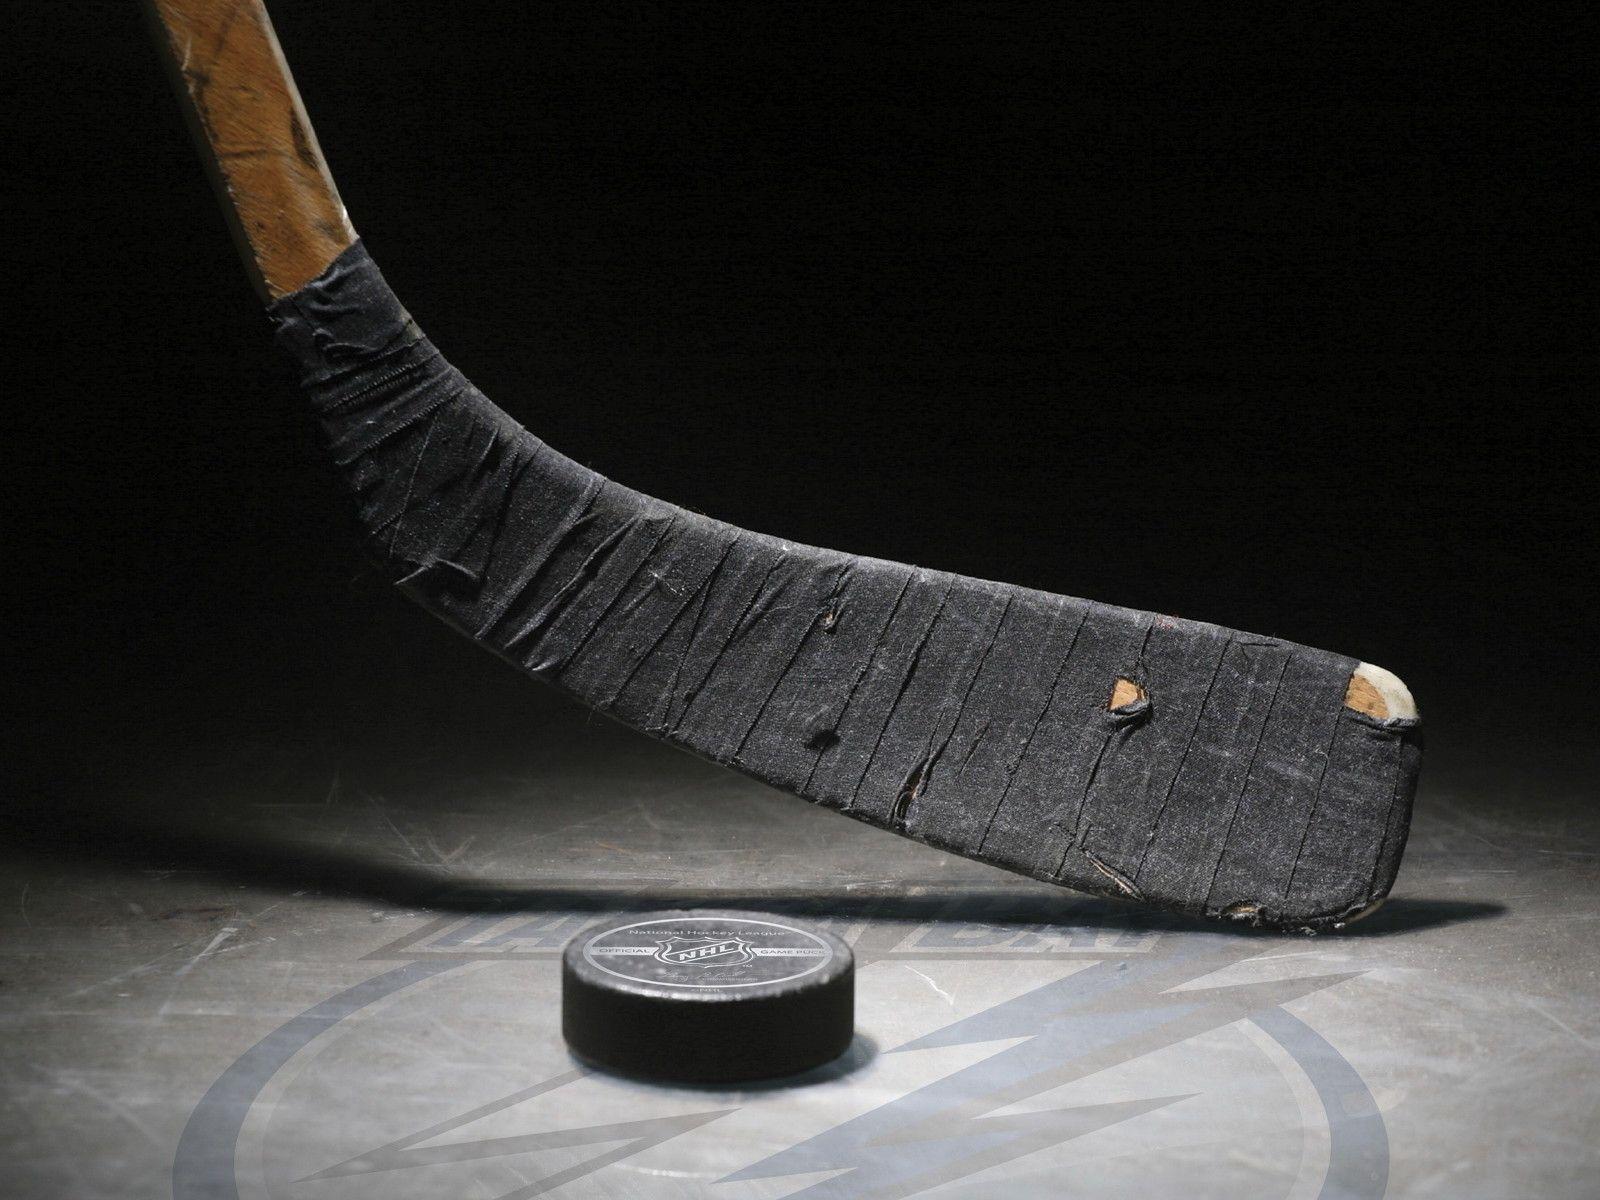 Hockey Stick and Puck wallpaper and image, picture